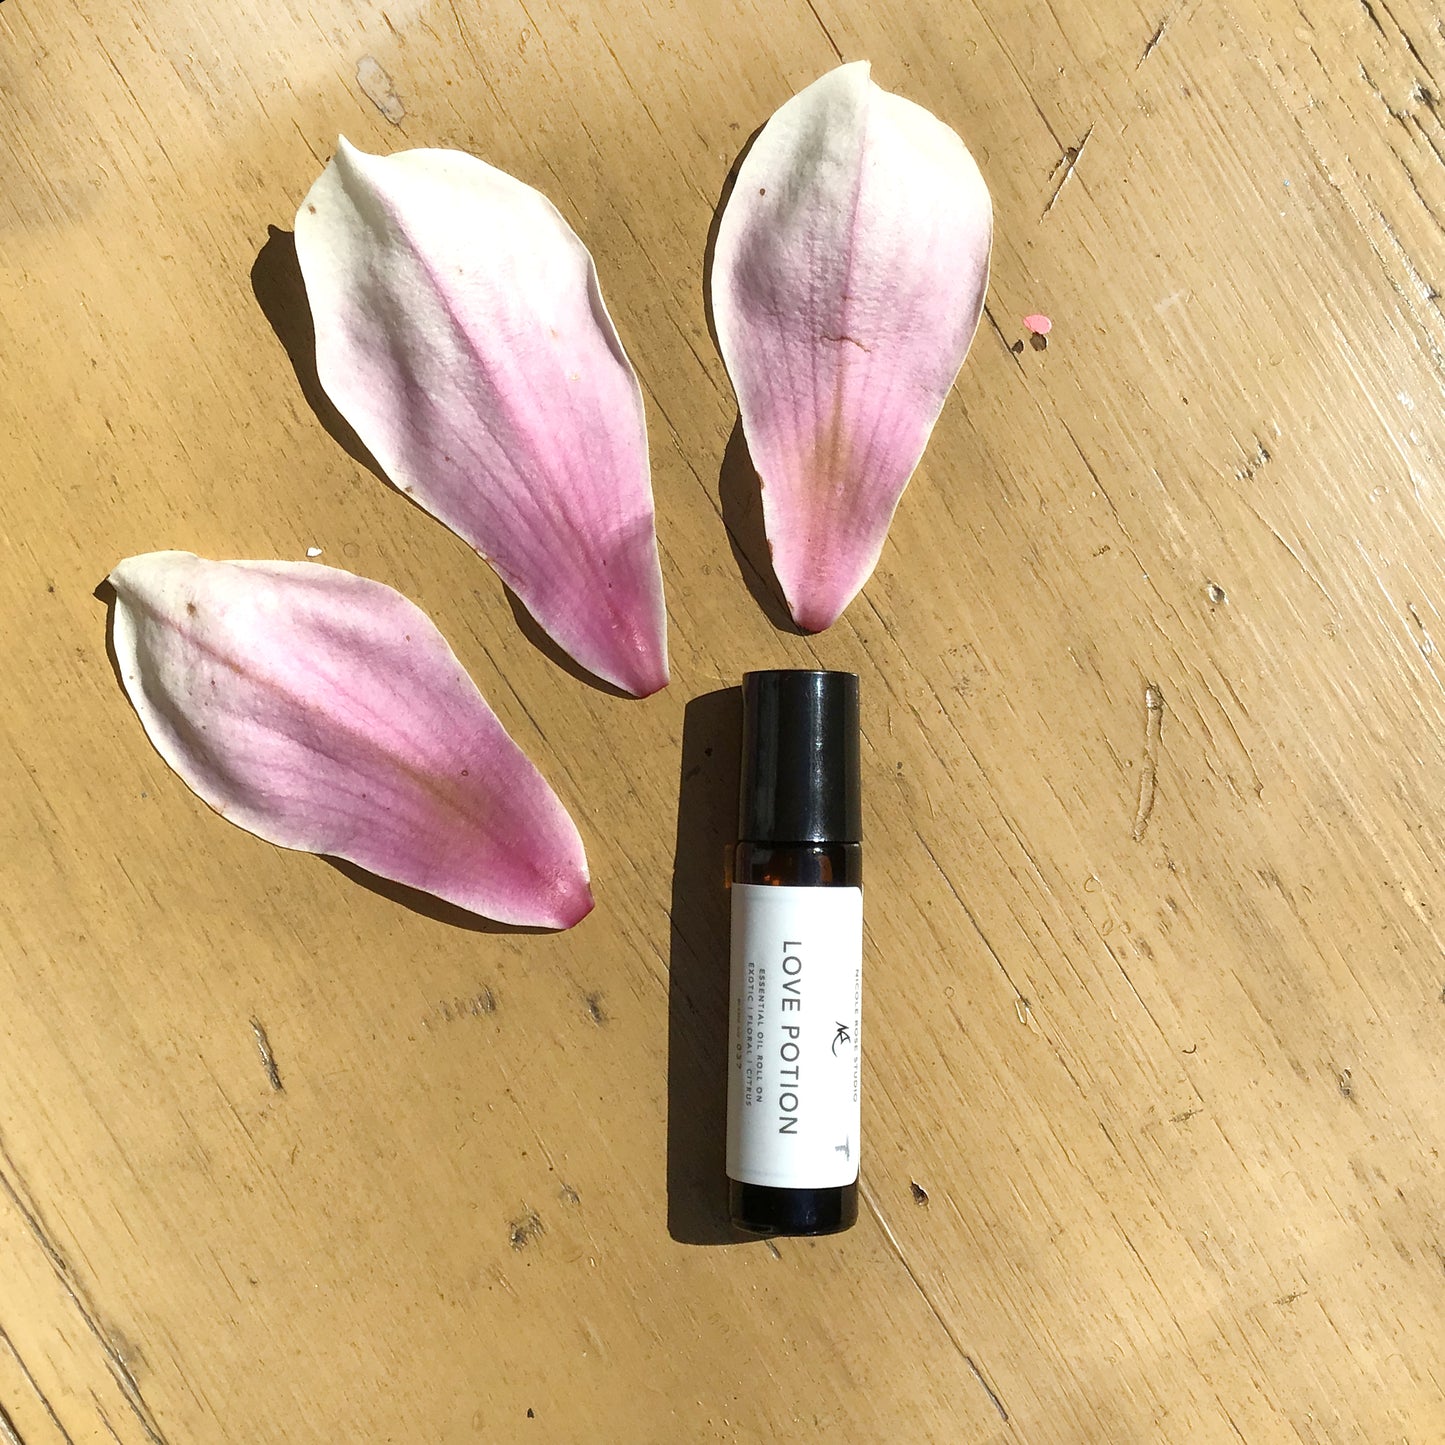 Love Potion Essential Oil Roll On